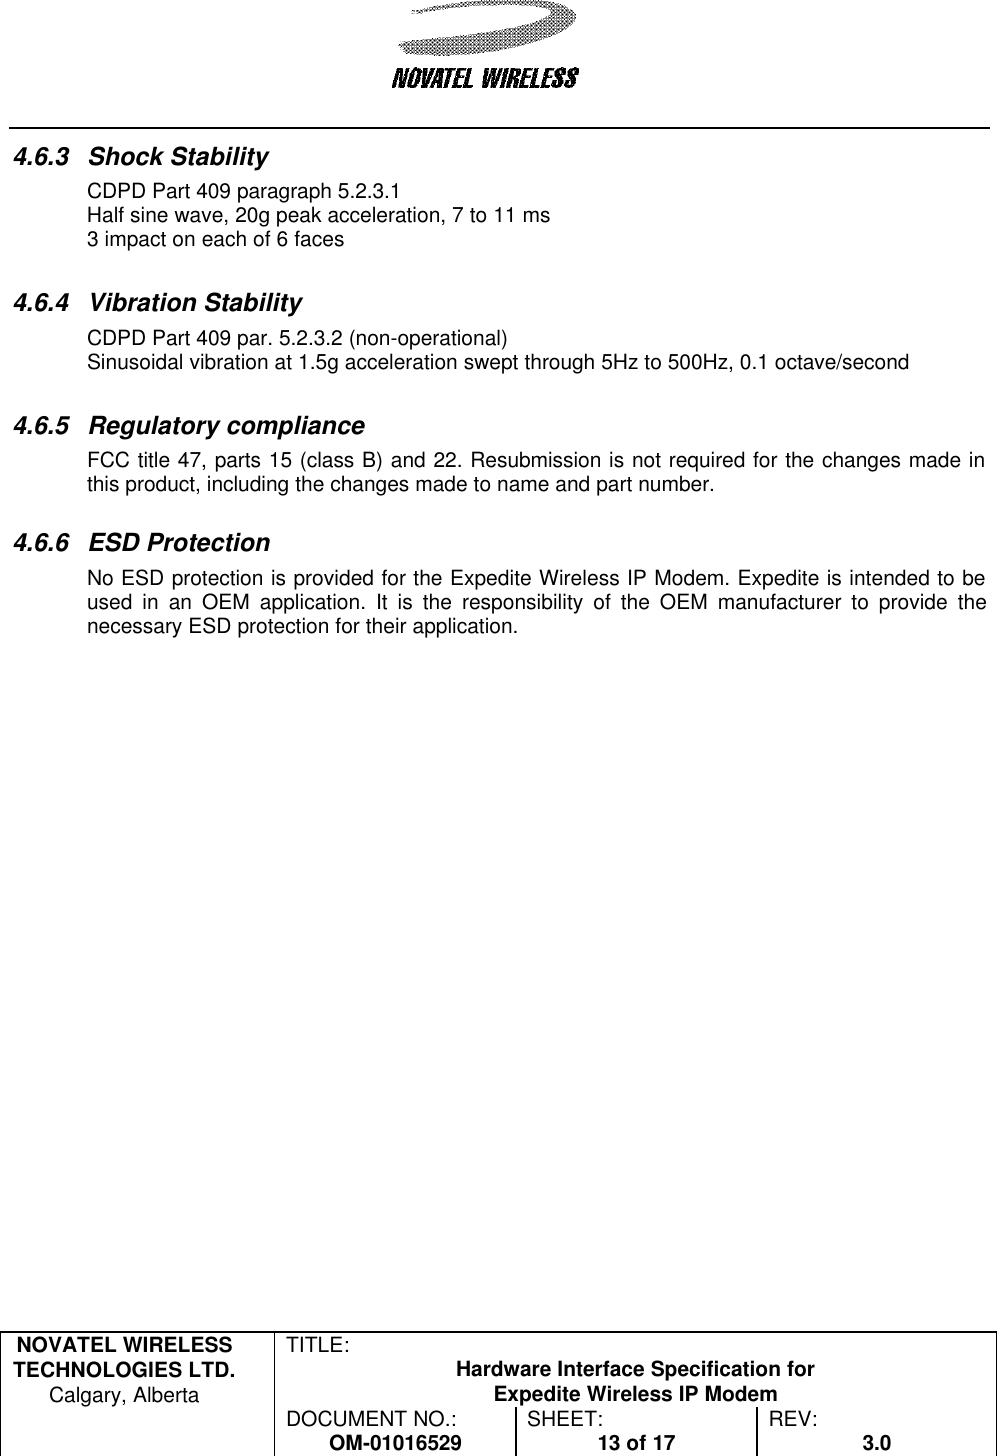   NOVATEL WIRELESS TECHNOLOGIES LTD.  Calgary, Alberta TITLE: Hardware Interface Specification for Expedite Wireless IP Modem  DOCUMENT NO.: OM-01016529 SHEET: 13 of 17 REV: 3.0   4.6.3 Shock Stability CDPD Part 409 paragraph 5.2.3.1 Half sine wave, 20g peak acceleration, 7 to 11 ms 3 impact on each of 6 faces  4.6.4 Vibration Stability CDPD Part 409 par. 5.2.3.2 (non-operational) Sinusoidal vibration at 1.5g acceleration swept through 5Hz to 500Hz, 0.1 octave/second  4.6.5 Regulatory compliance FCC title 47, parts 15 (class B) and 22. Resubmission is not required for the changes made in this product, including the changes made to name and part number.   4.6.6 ESD Protection No ESD protection is provided for the Expedite Wireless IP Modem. Expedite is intended to be used in an OEM application. It is the responsibility of the OEM manufacturer to provide the necessary ESD protection for their application. 